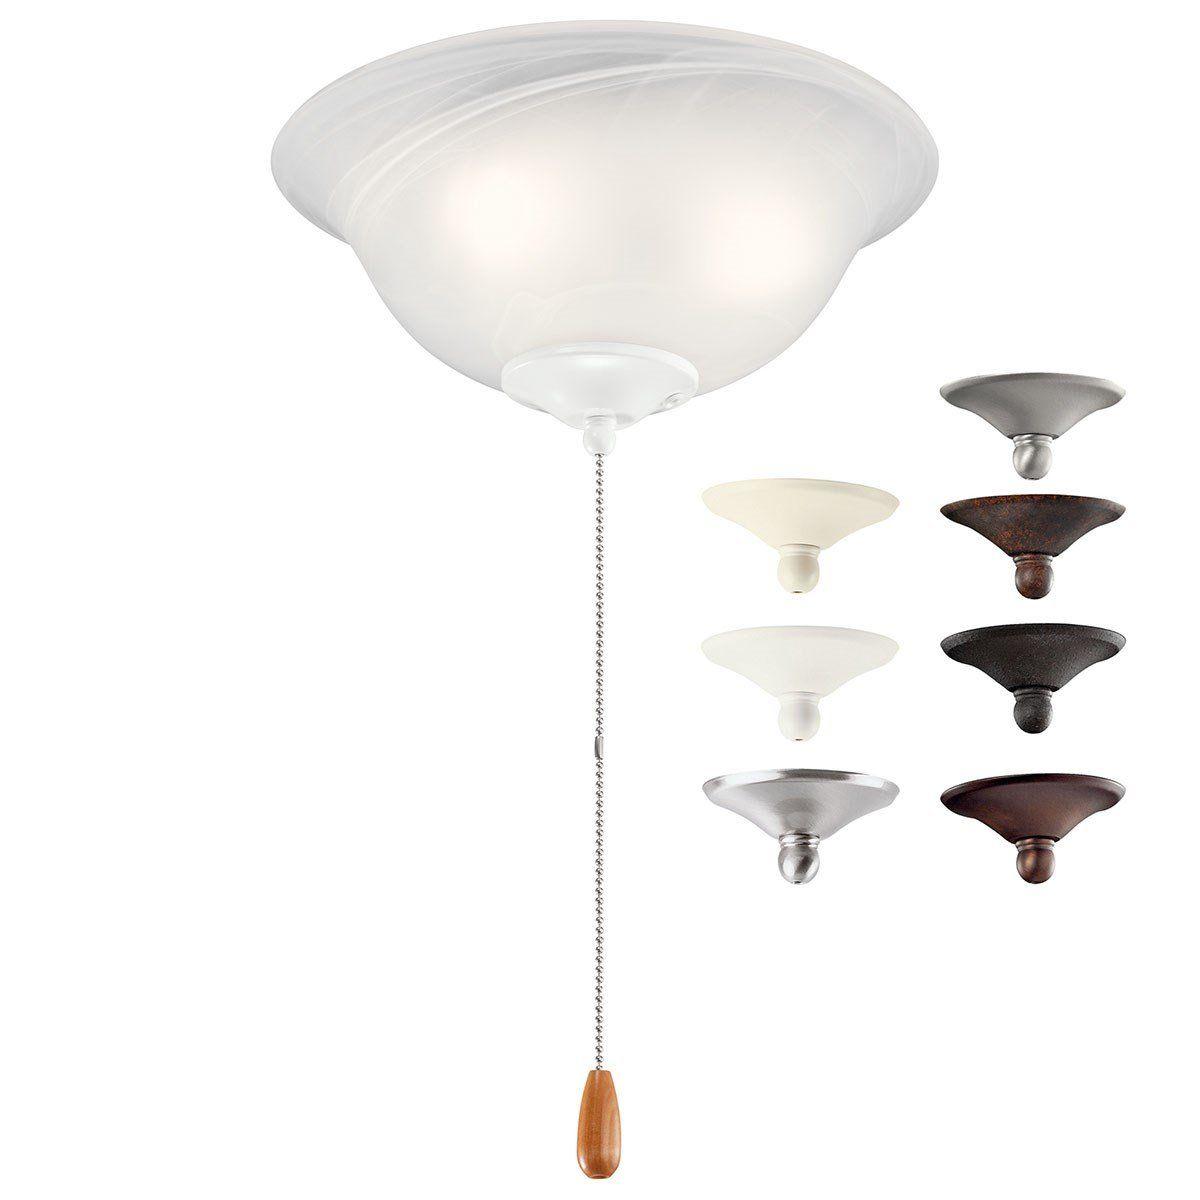 11 Inch Ceiling Fan LED Light Kit With Umber Etched Bowl, Alabaster Swirl Glass